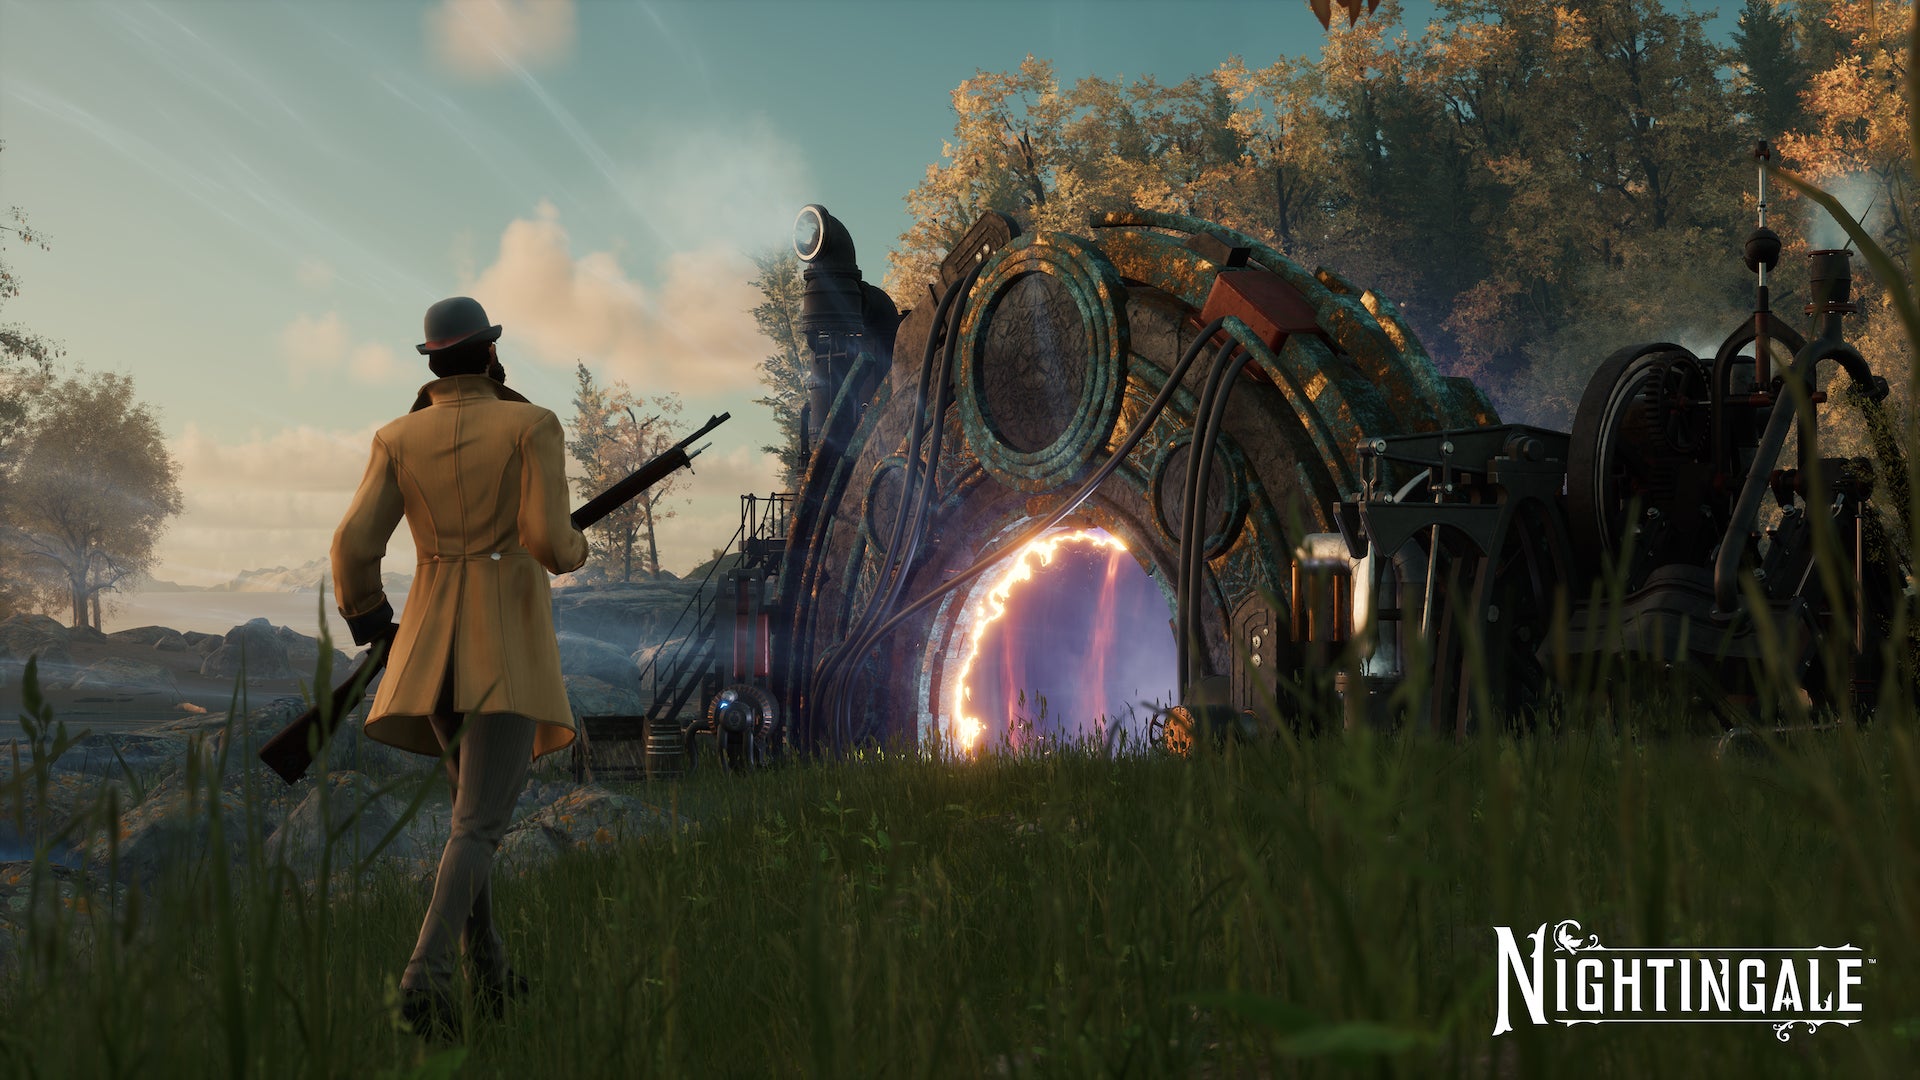 Image for Nightingale announced at The Game Awards, a shared-world survival game made by ex-Bioware staff